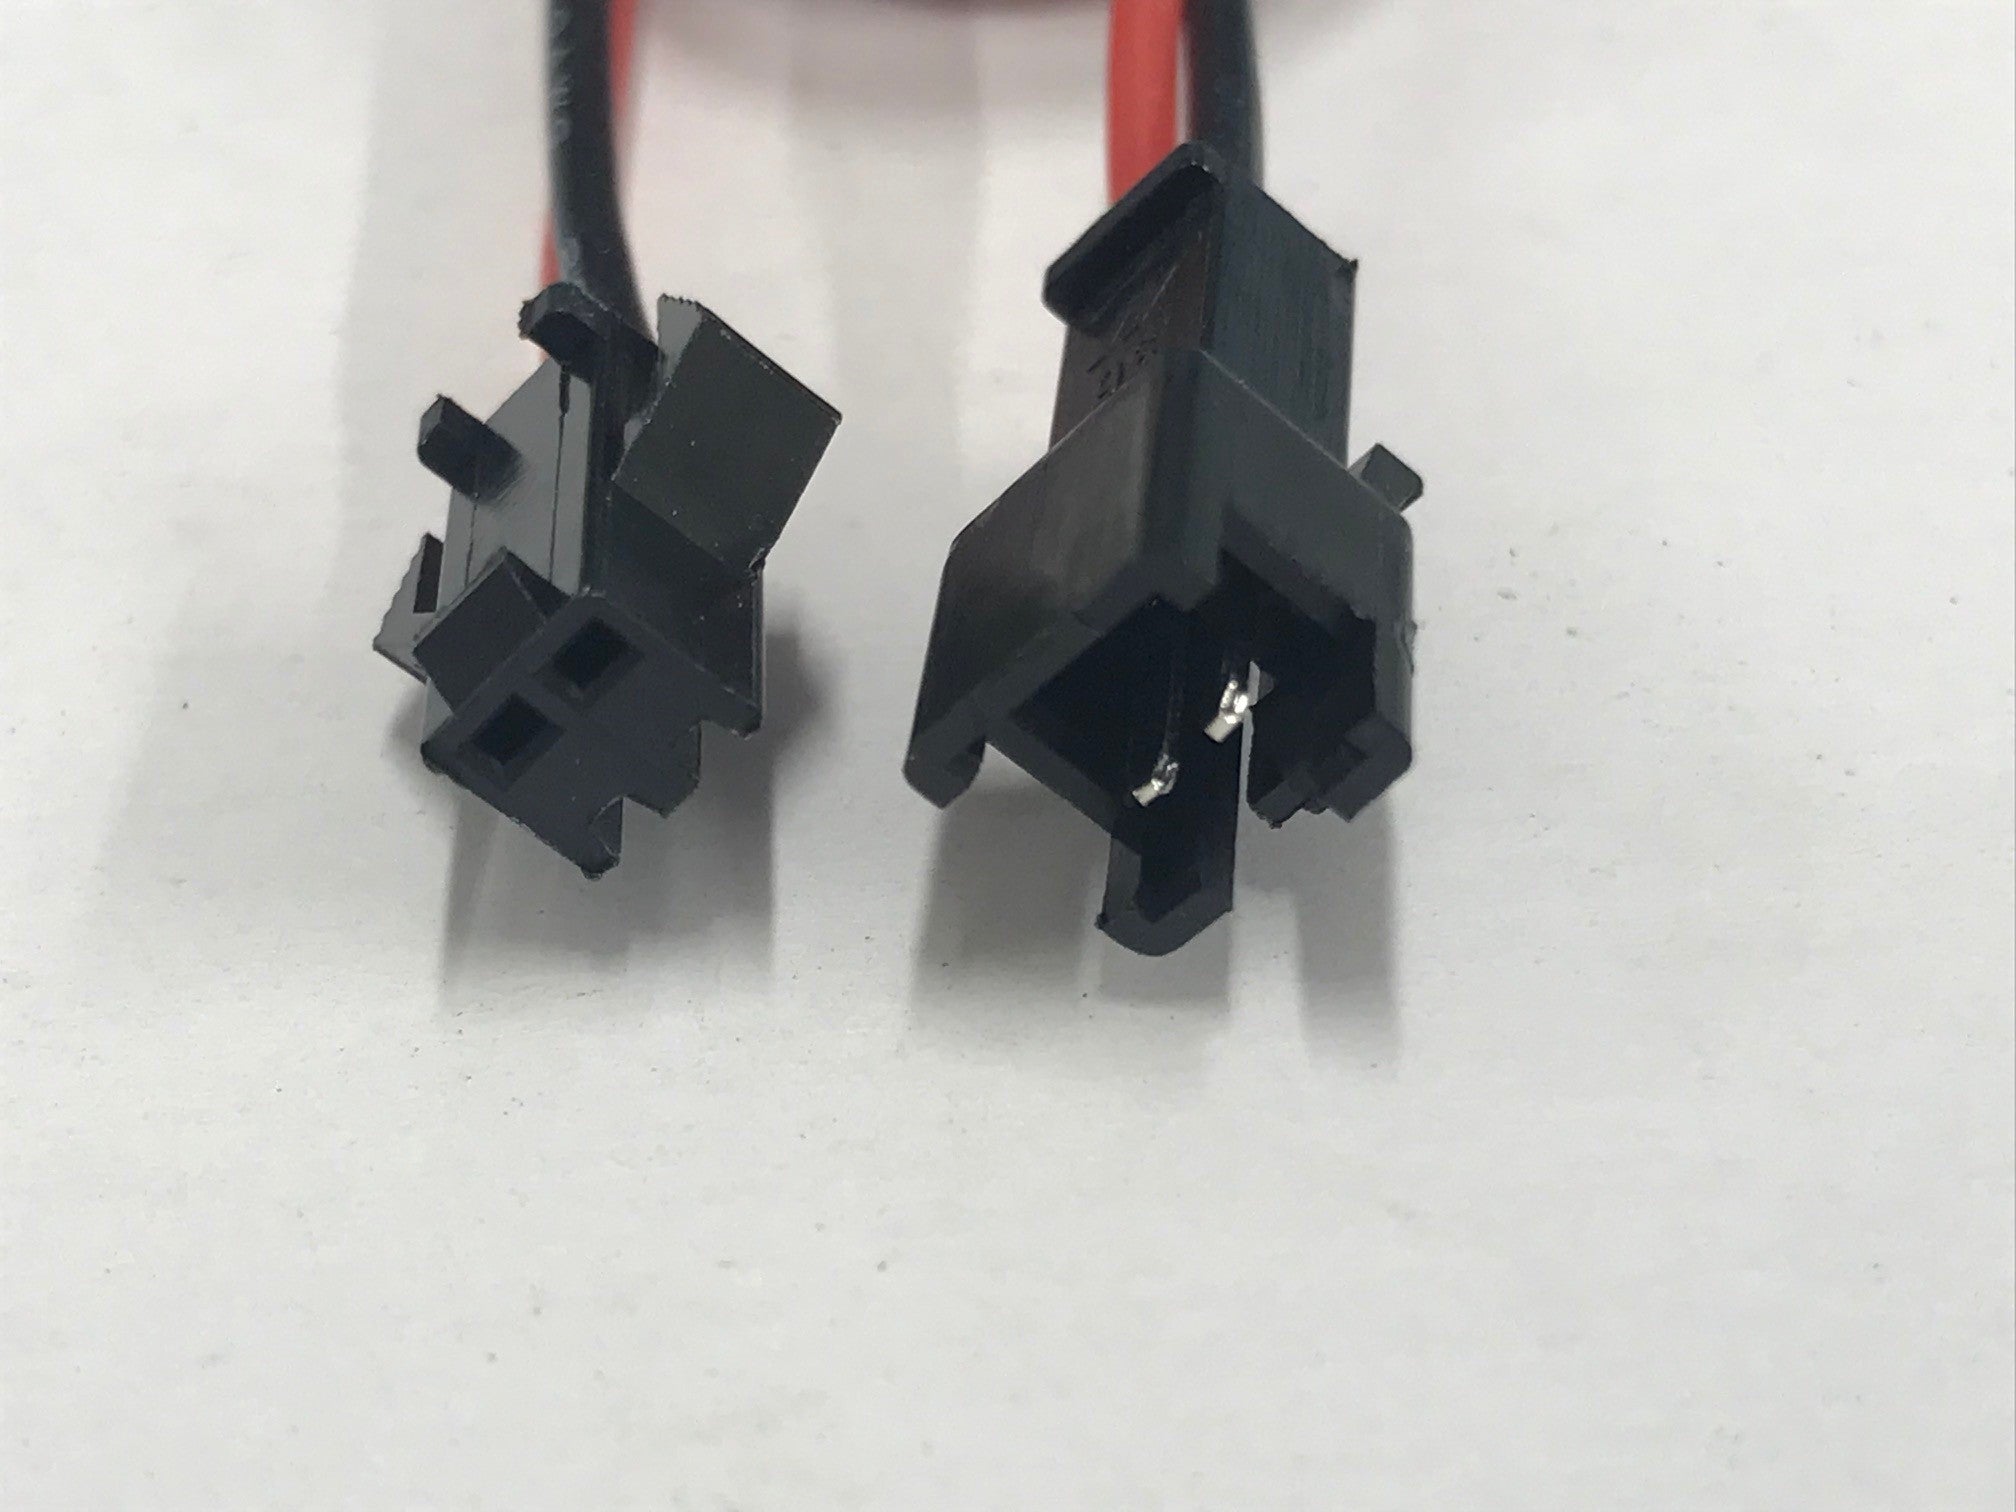 2 Wire Ash-lock Style Connectors for Servos & Lights